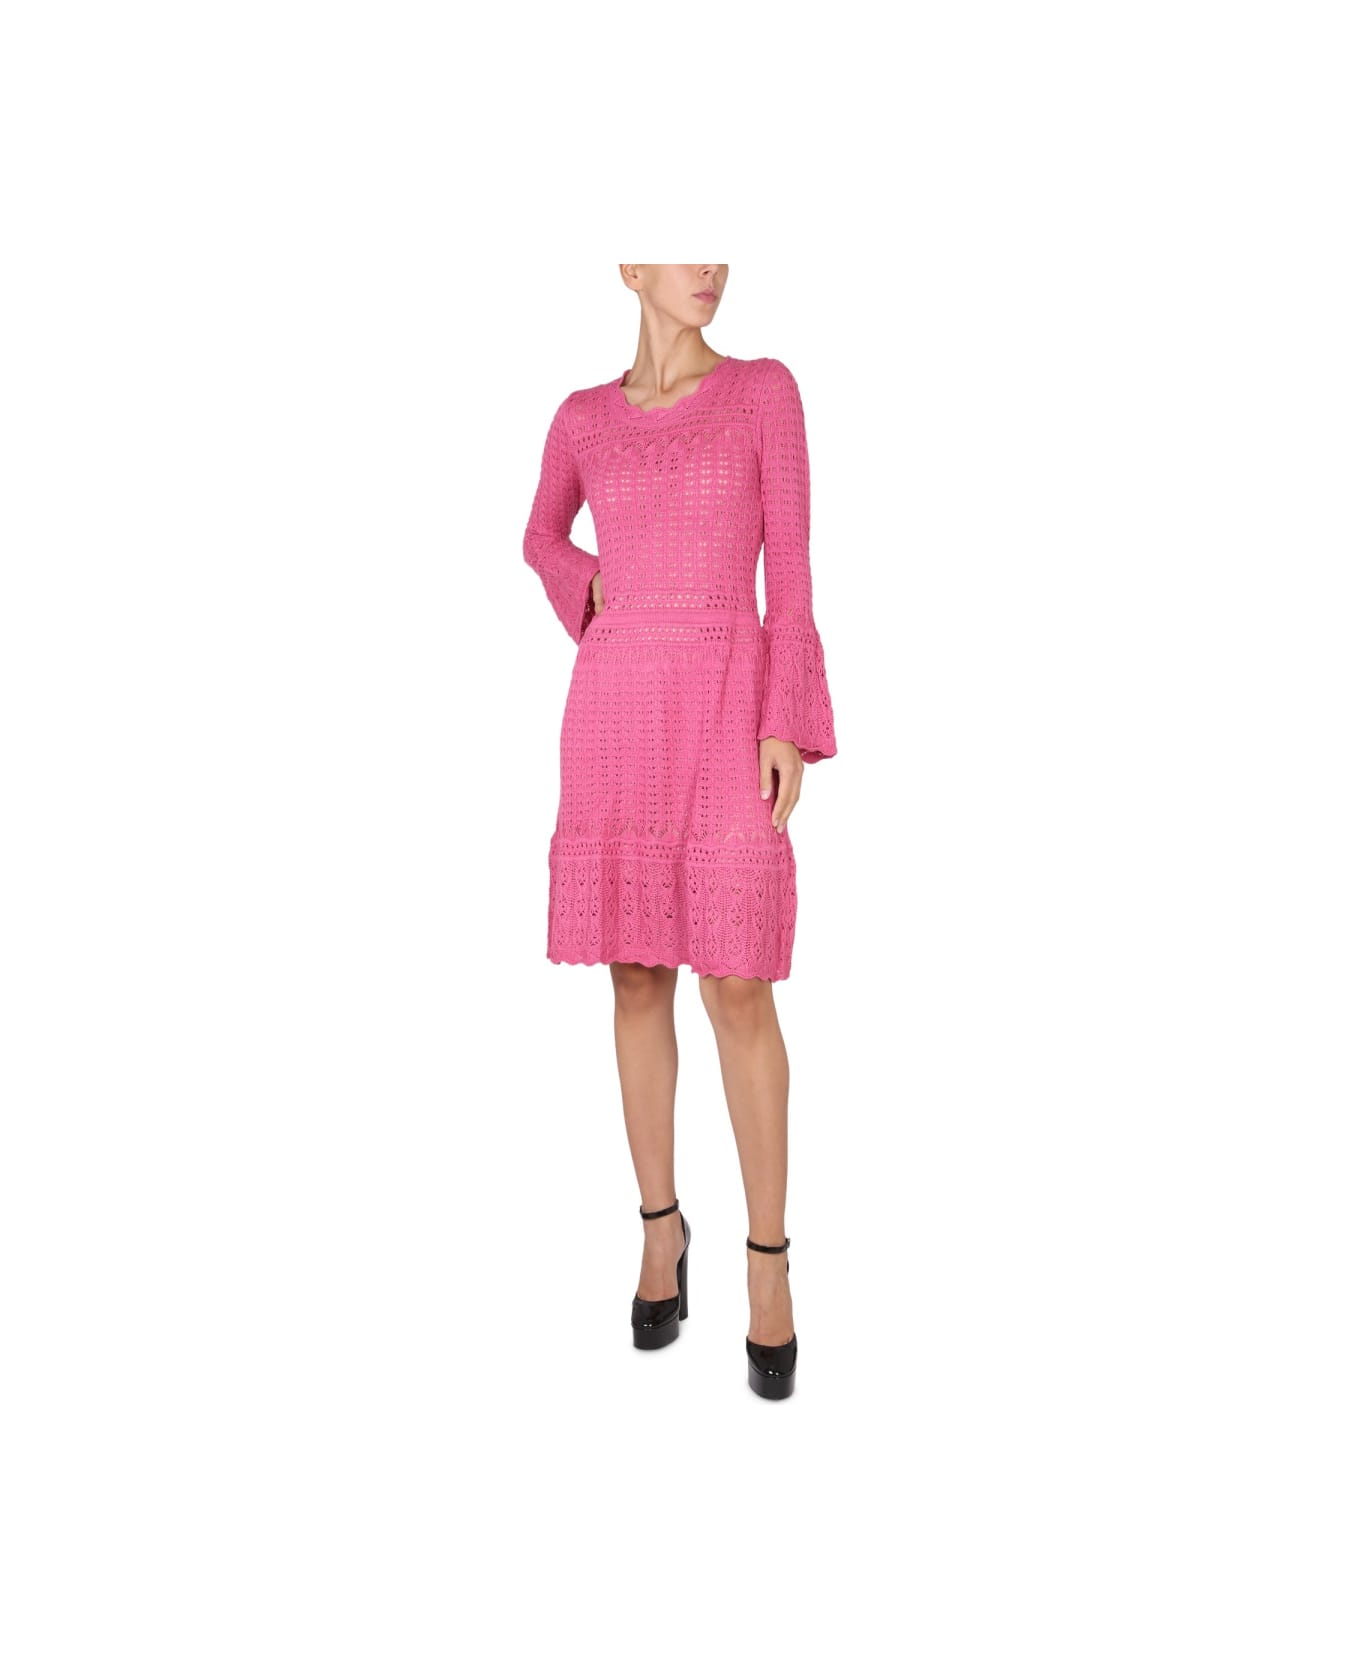 Boutique Moschino Wool Blend Dress - PINK ワンピース＆ドレス